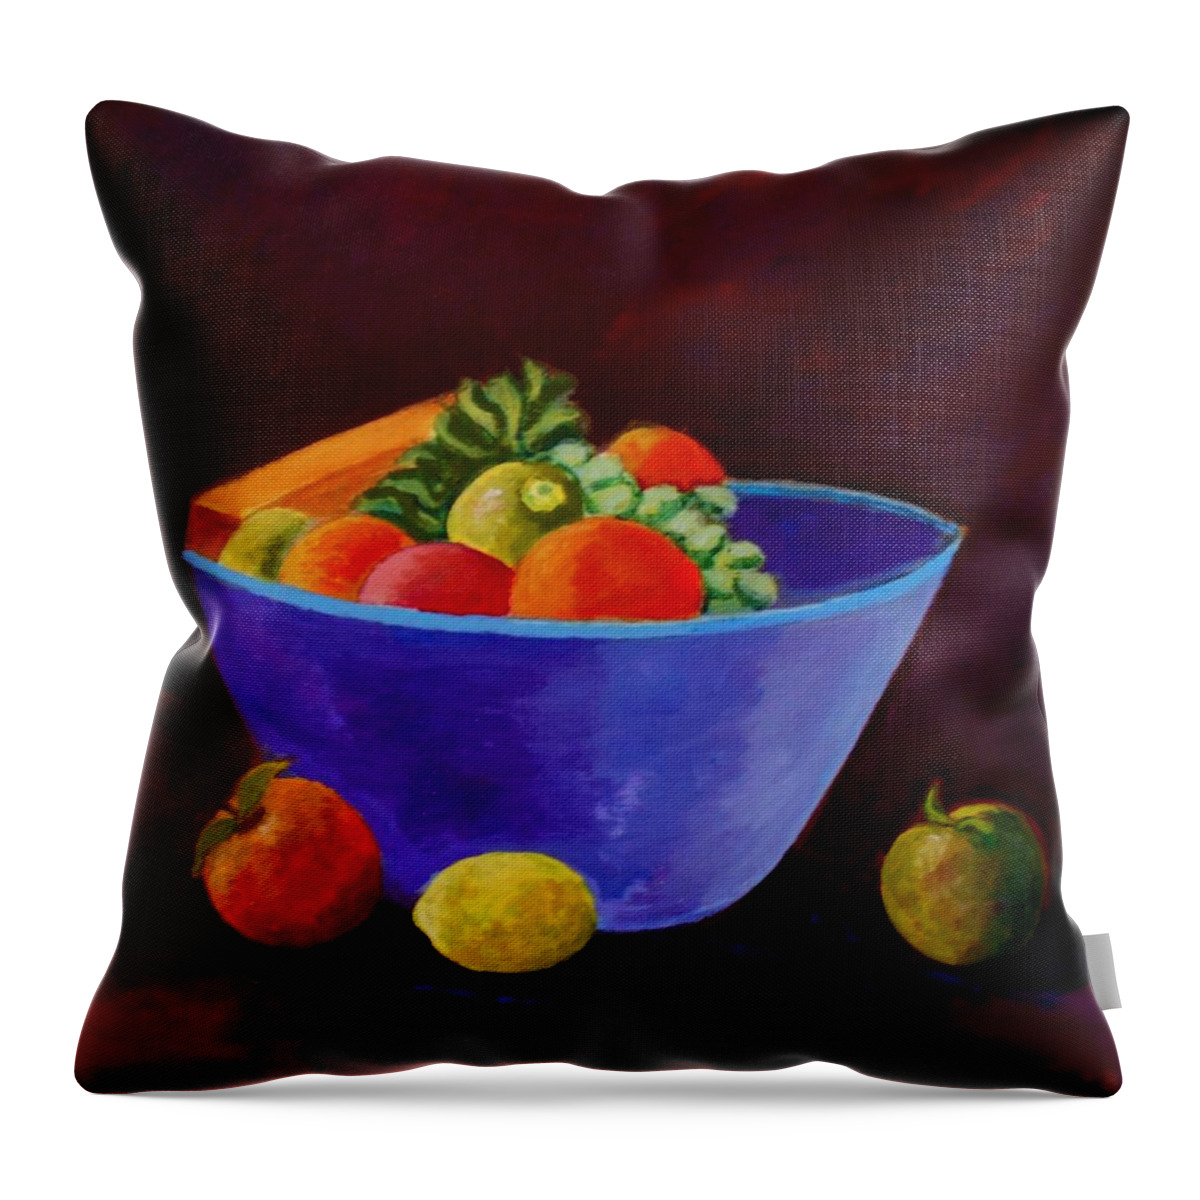 Still Life Throw Pillow featuring the painting Still life with fruits by Konstantinos Charalampopoulos